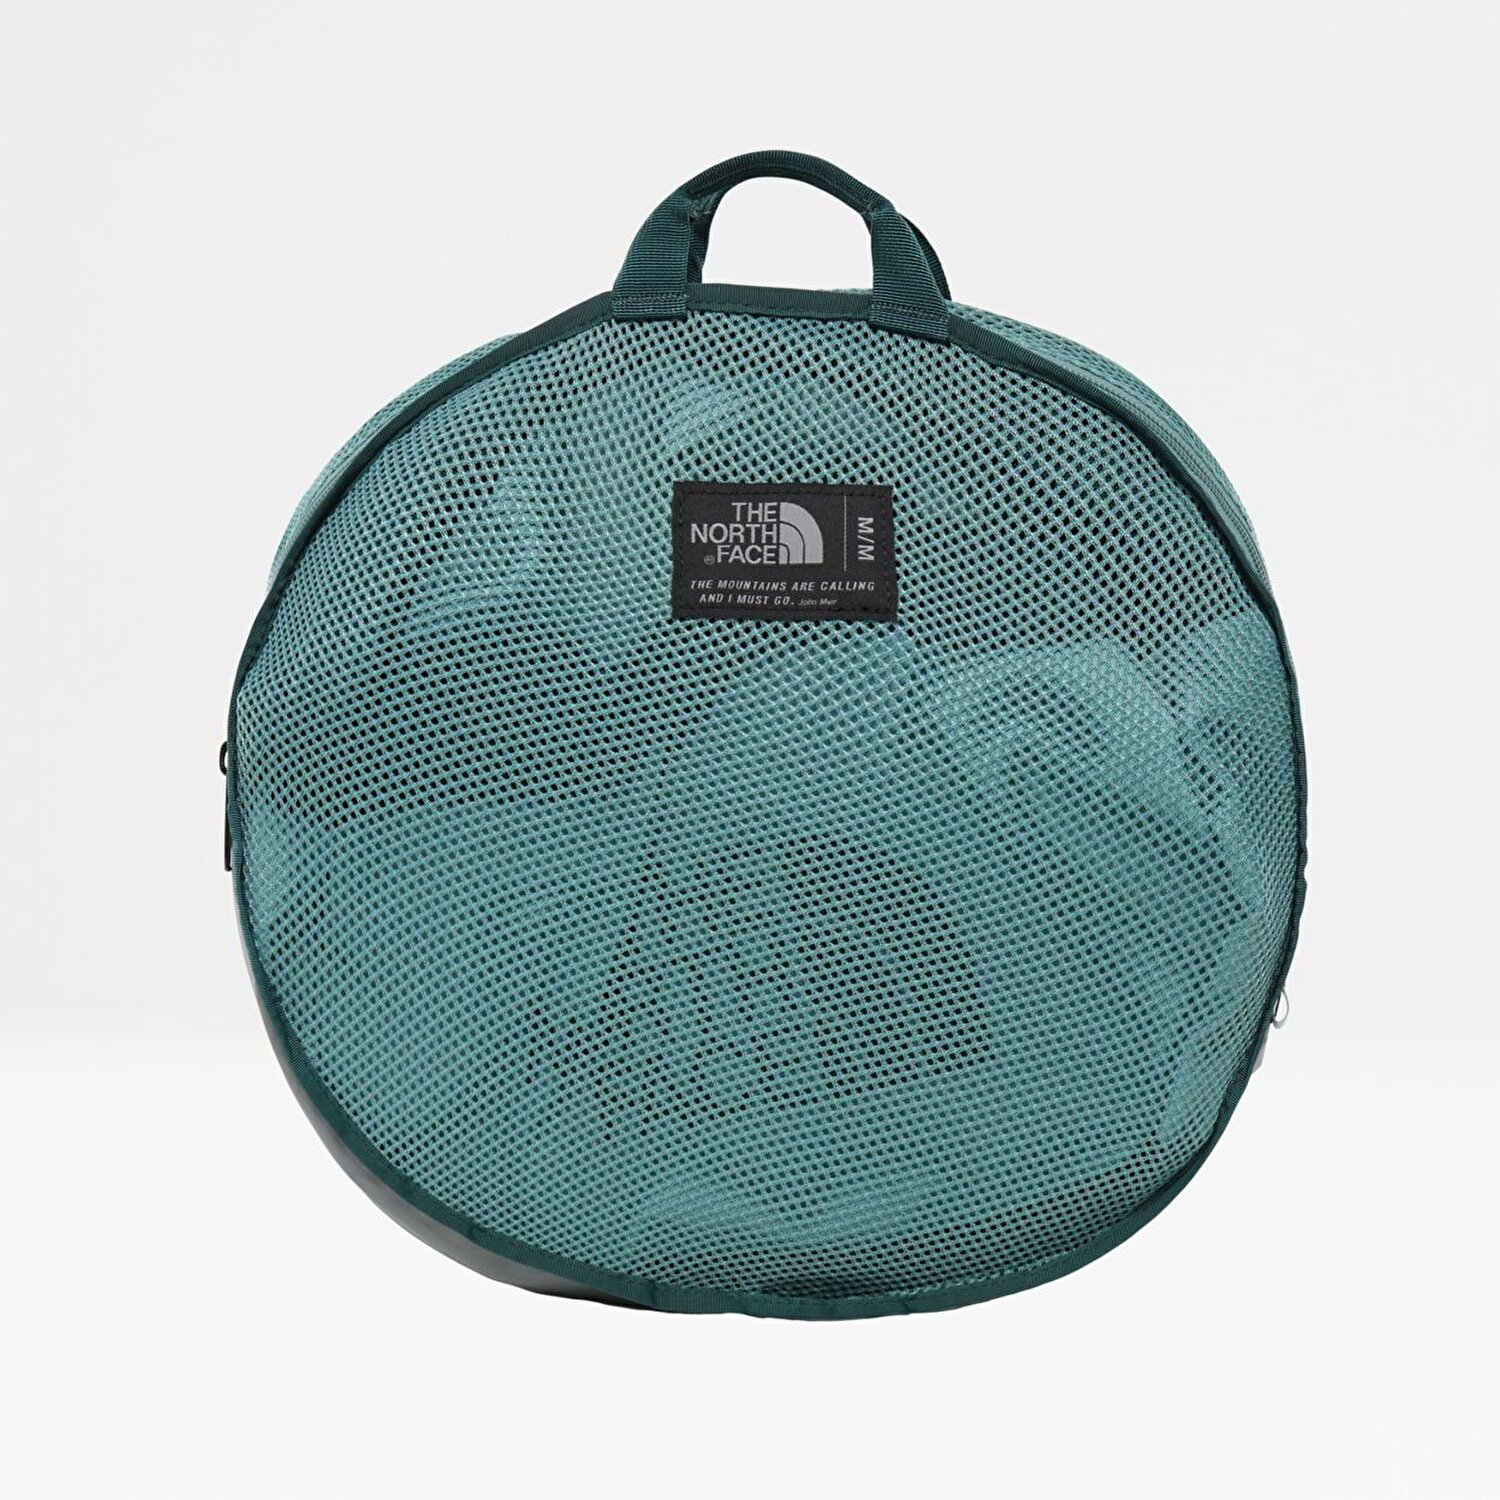 The North Face BASE CAMP DUFFEL - M. 5